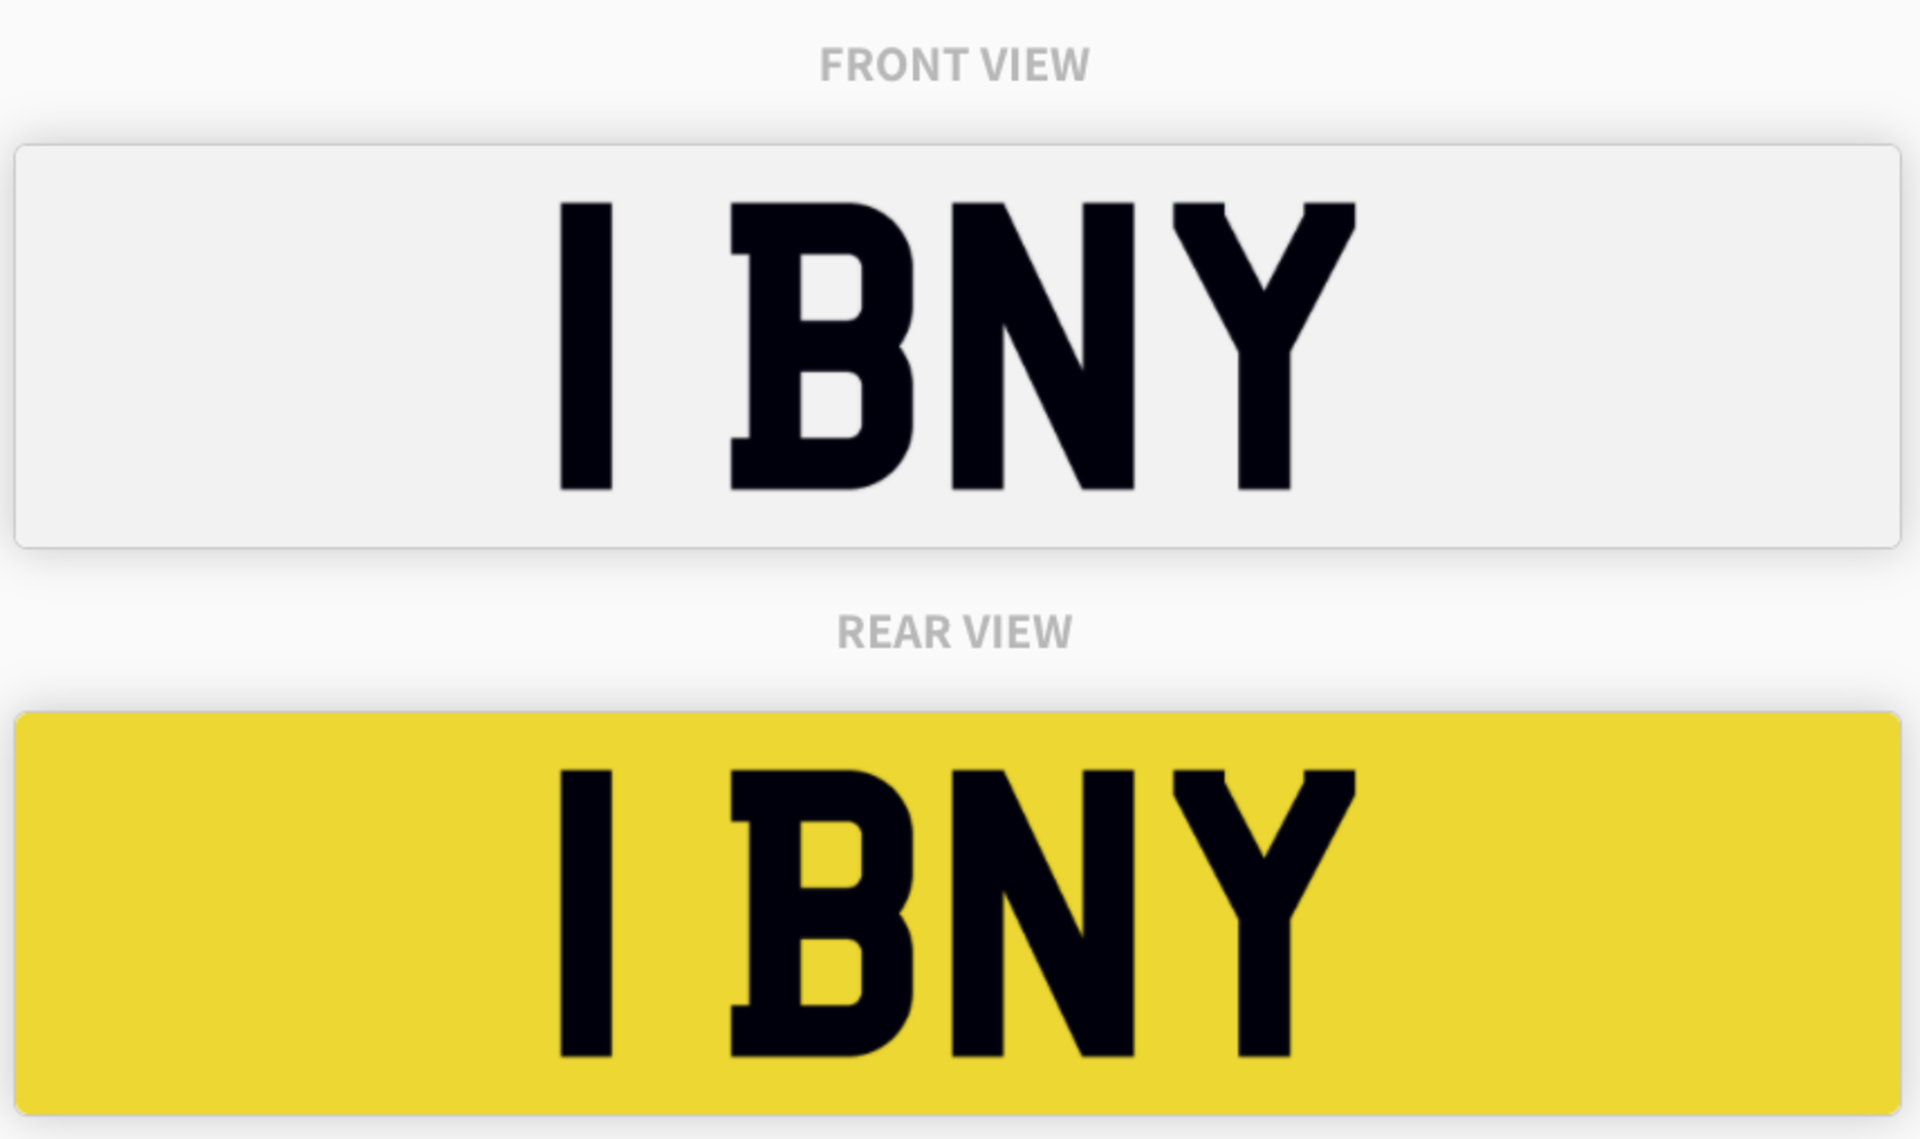 1 BNY , number plate on retention